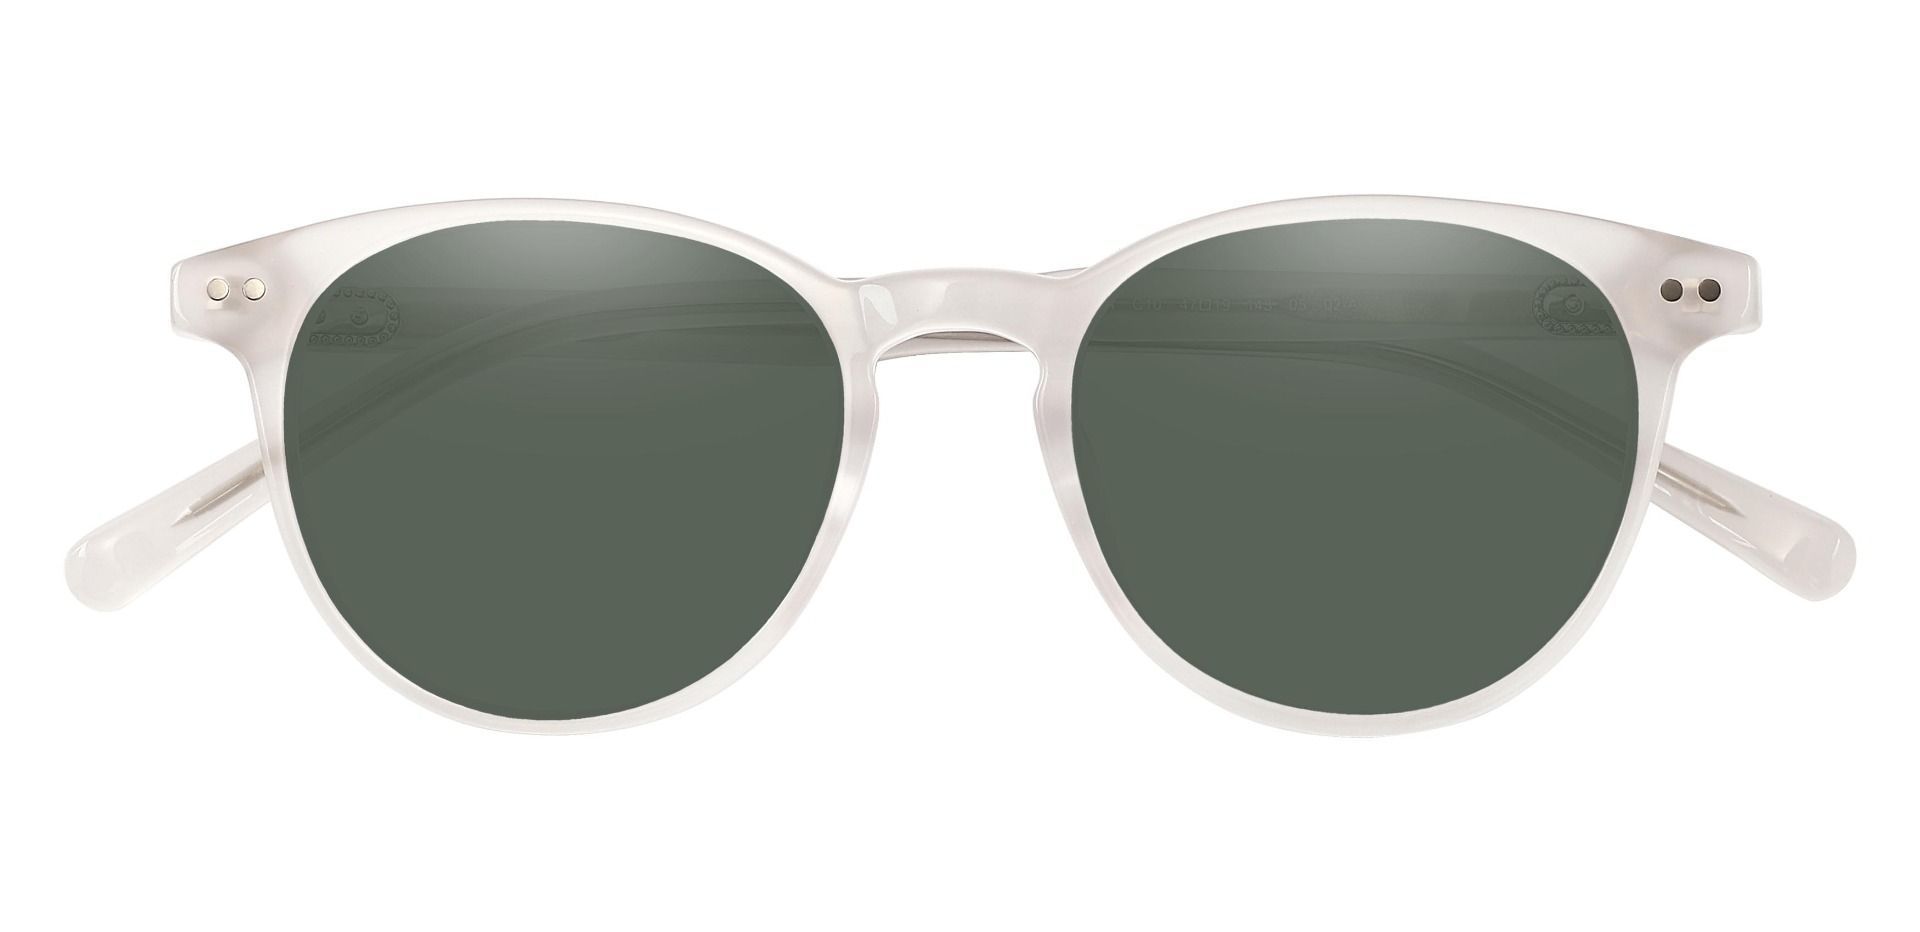 Marianna Oval Reading Sunglasses - White Frame With Green Lenses